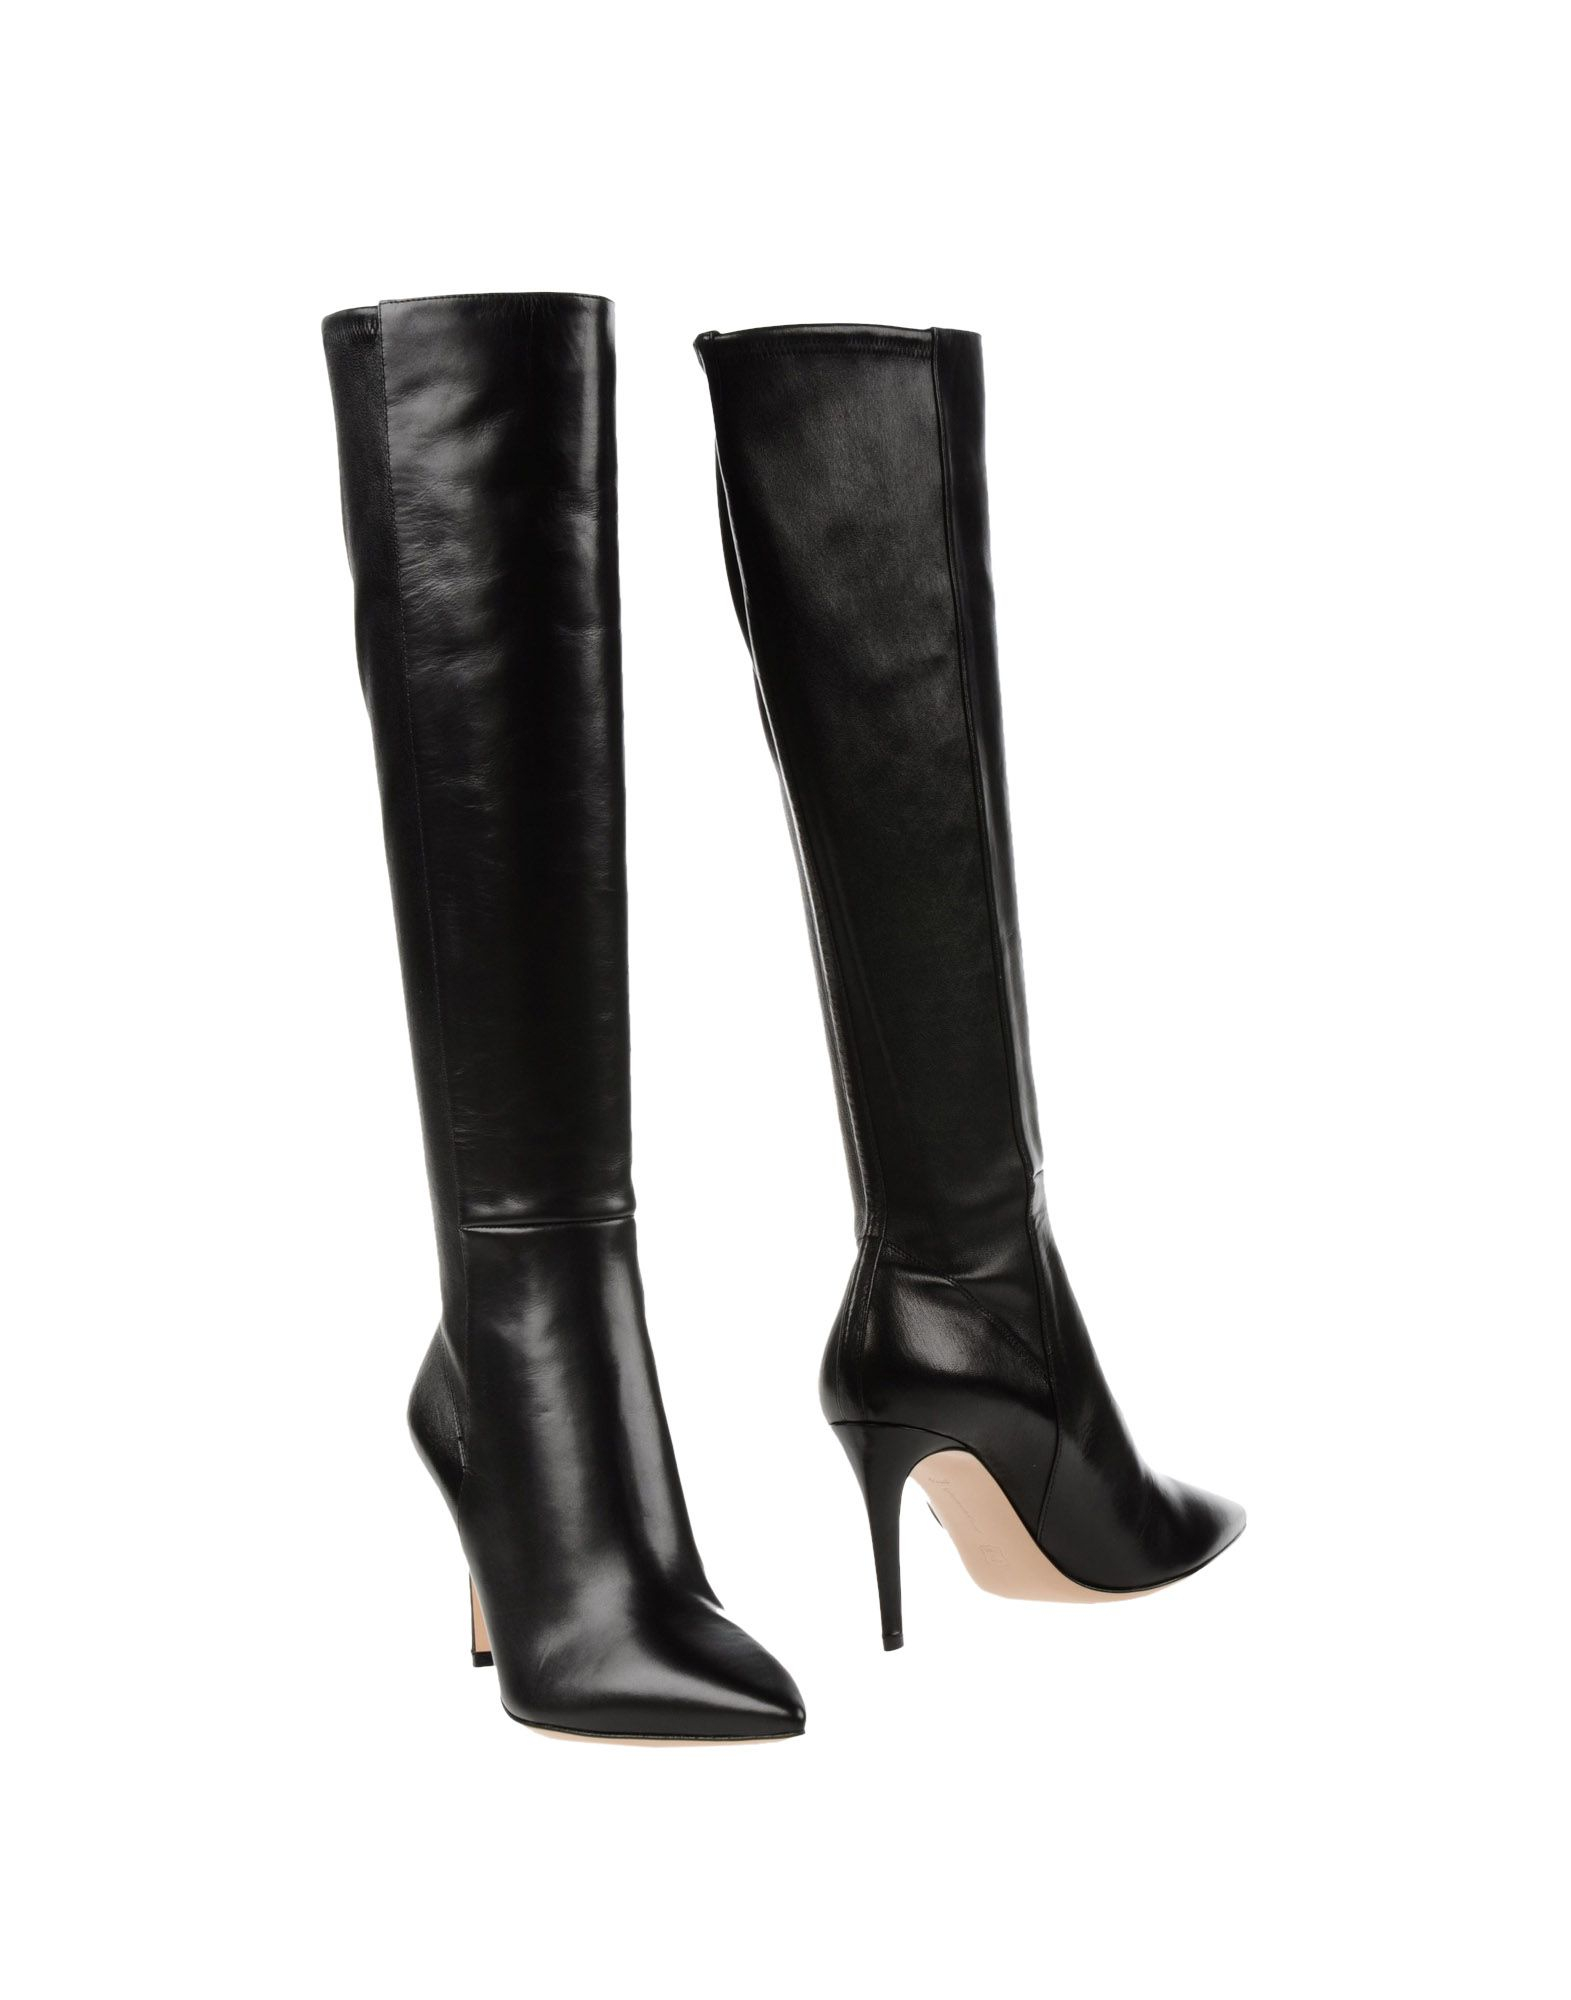 mens replica christian louboutin shoes - christian louboutin pointed-toe knee-high boots Black leather ...